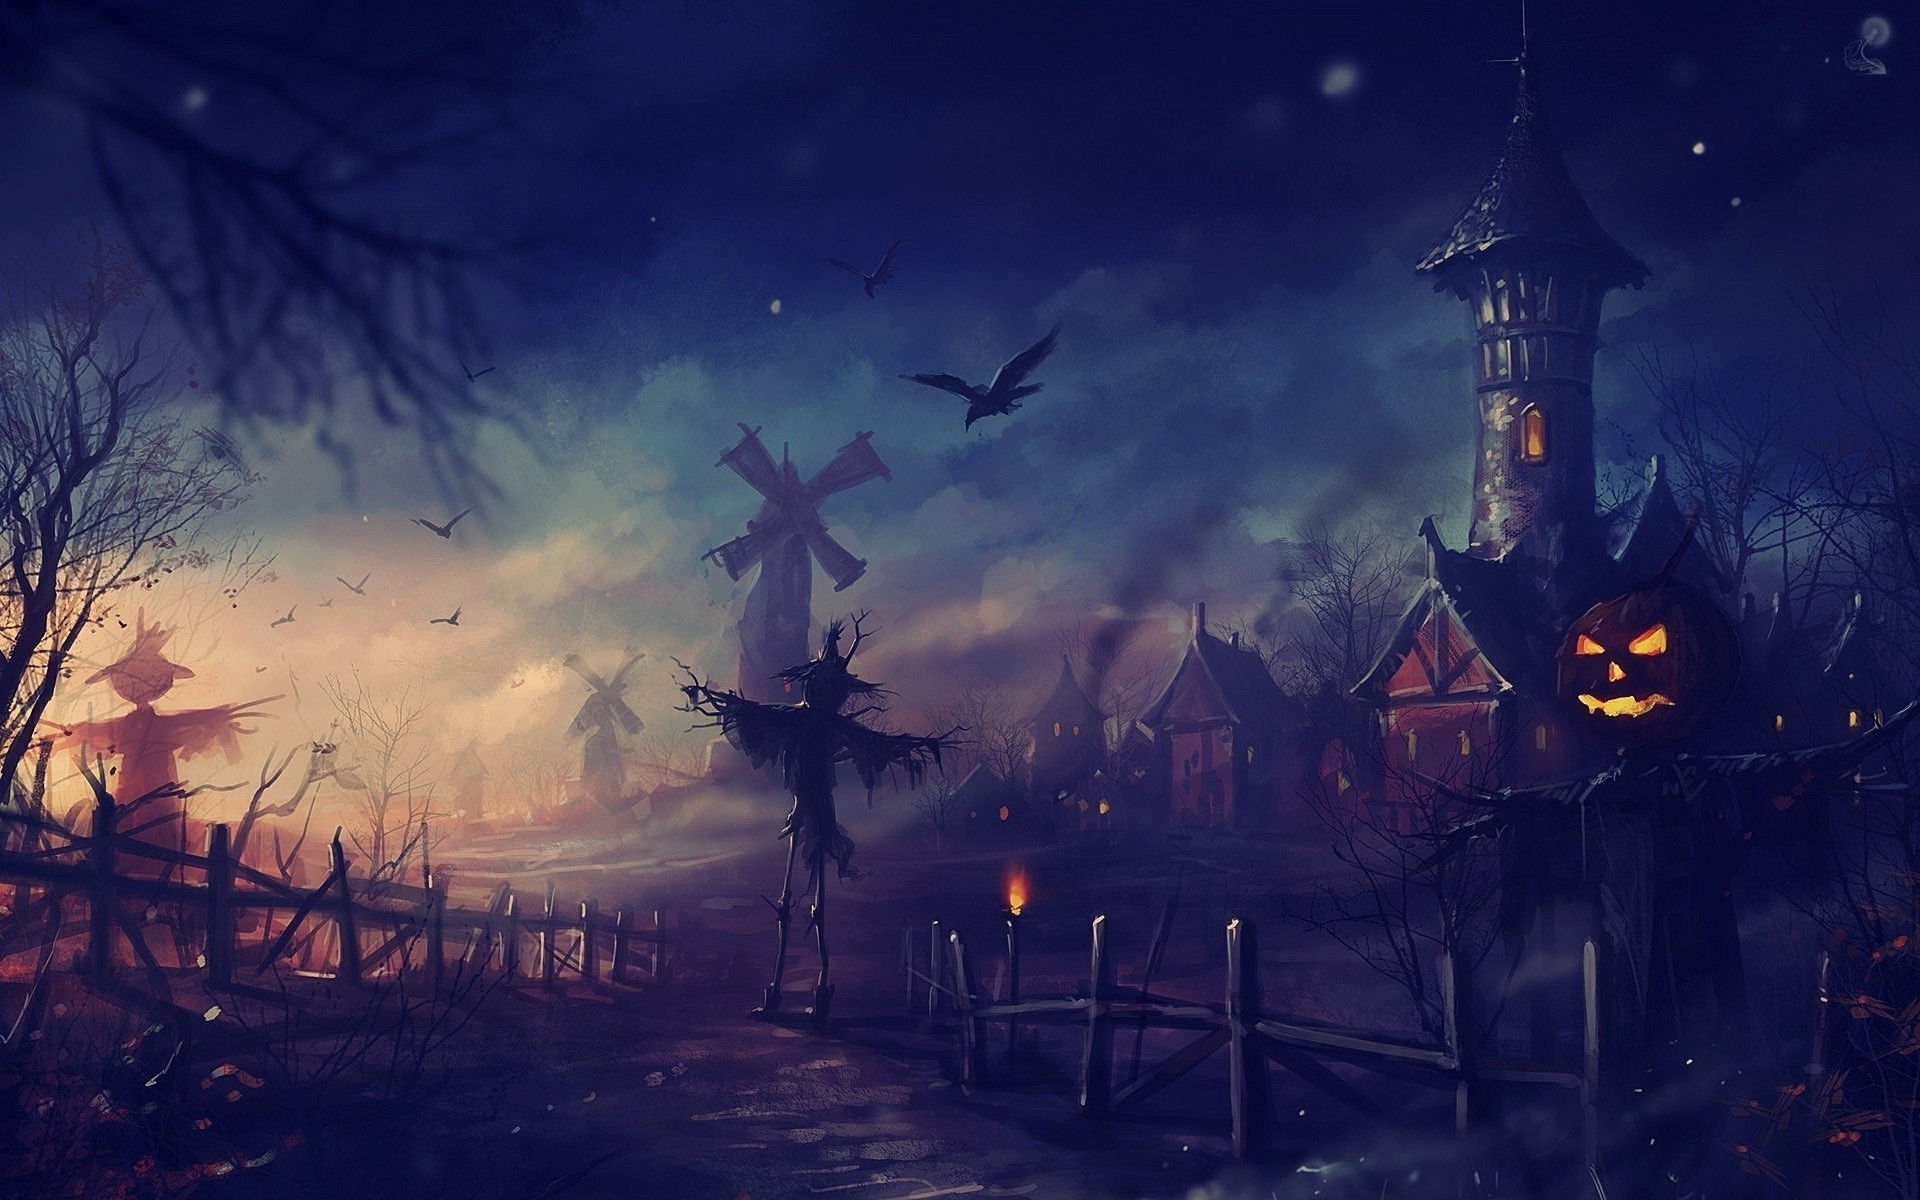 Halloween Night Animated Wallpaper This Is The Image Displayed .